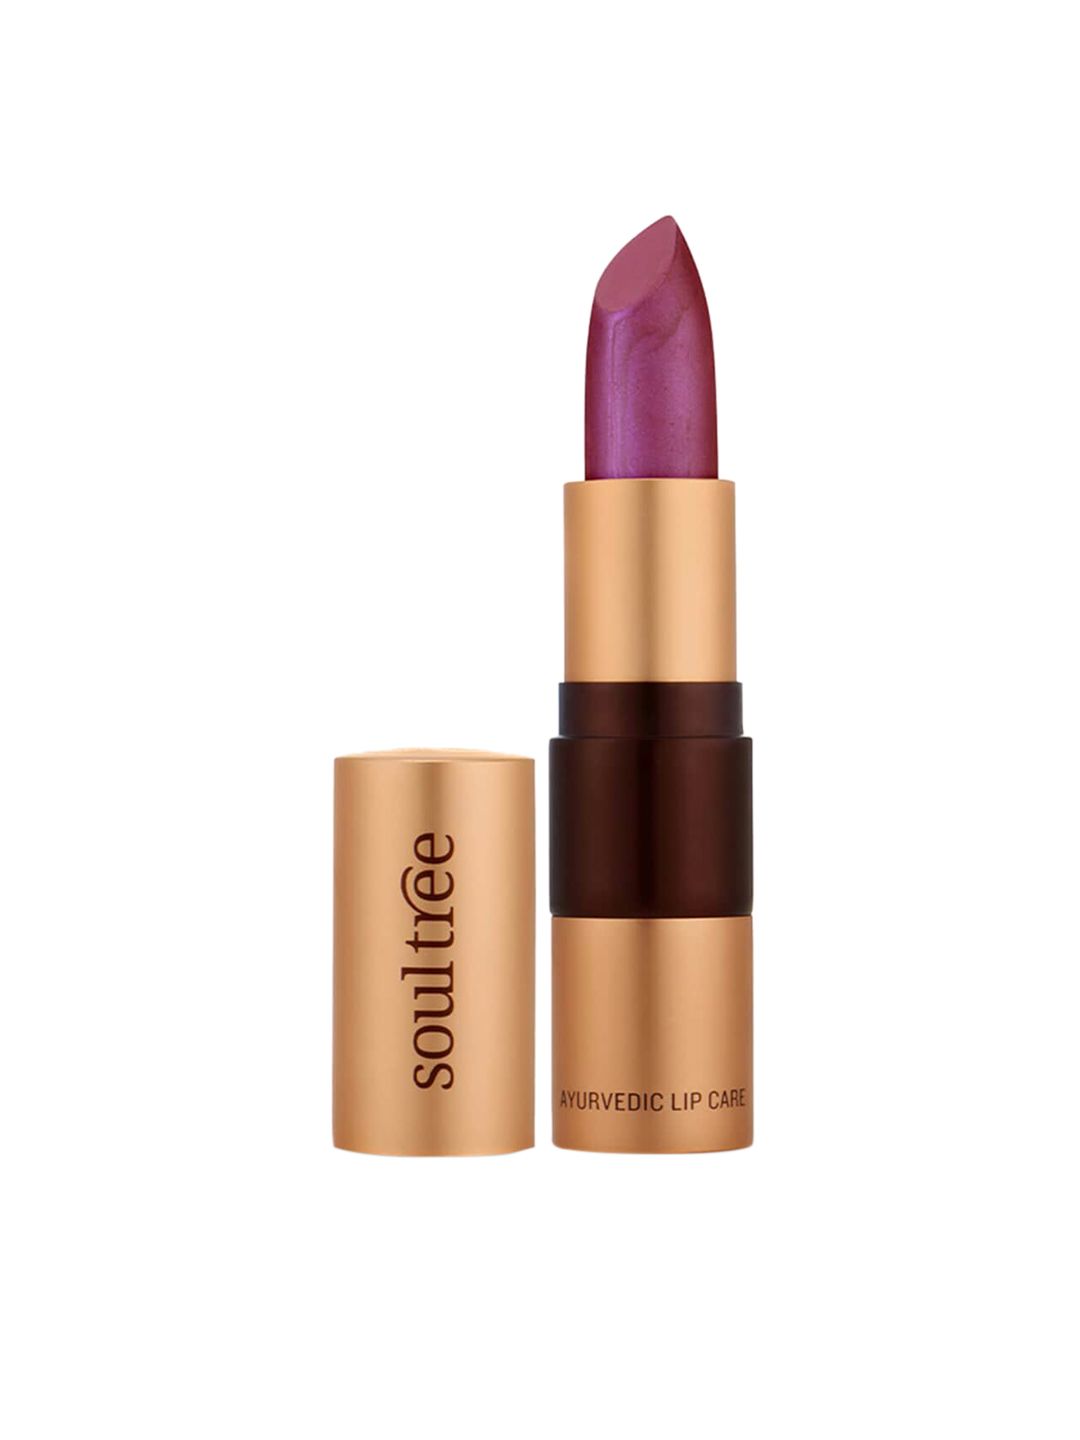 Soultree Ayurvedic Lipstick Glowing Violet 513 - 4gm Price in India